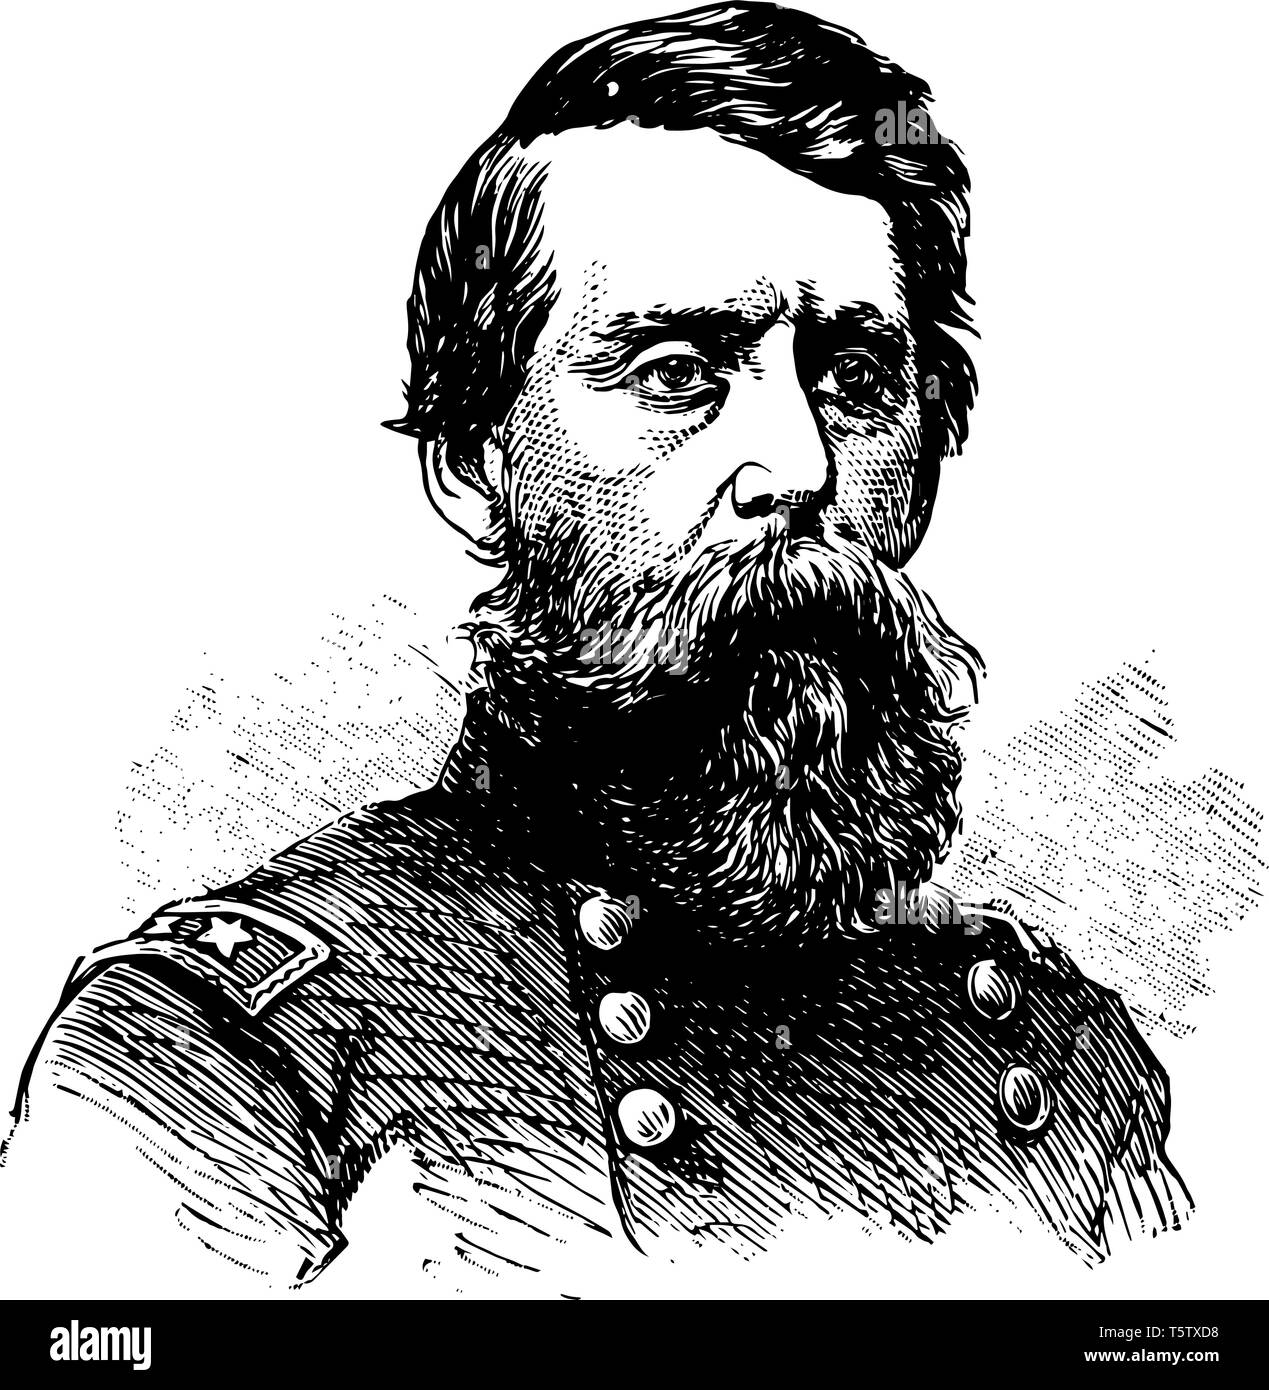 Jefferson C. Davis 1828 to 1879 he was a officer of the United States Army during the American civil war and first commander of the department of Alas Stock Vector